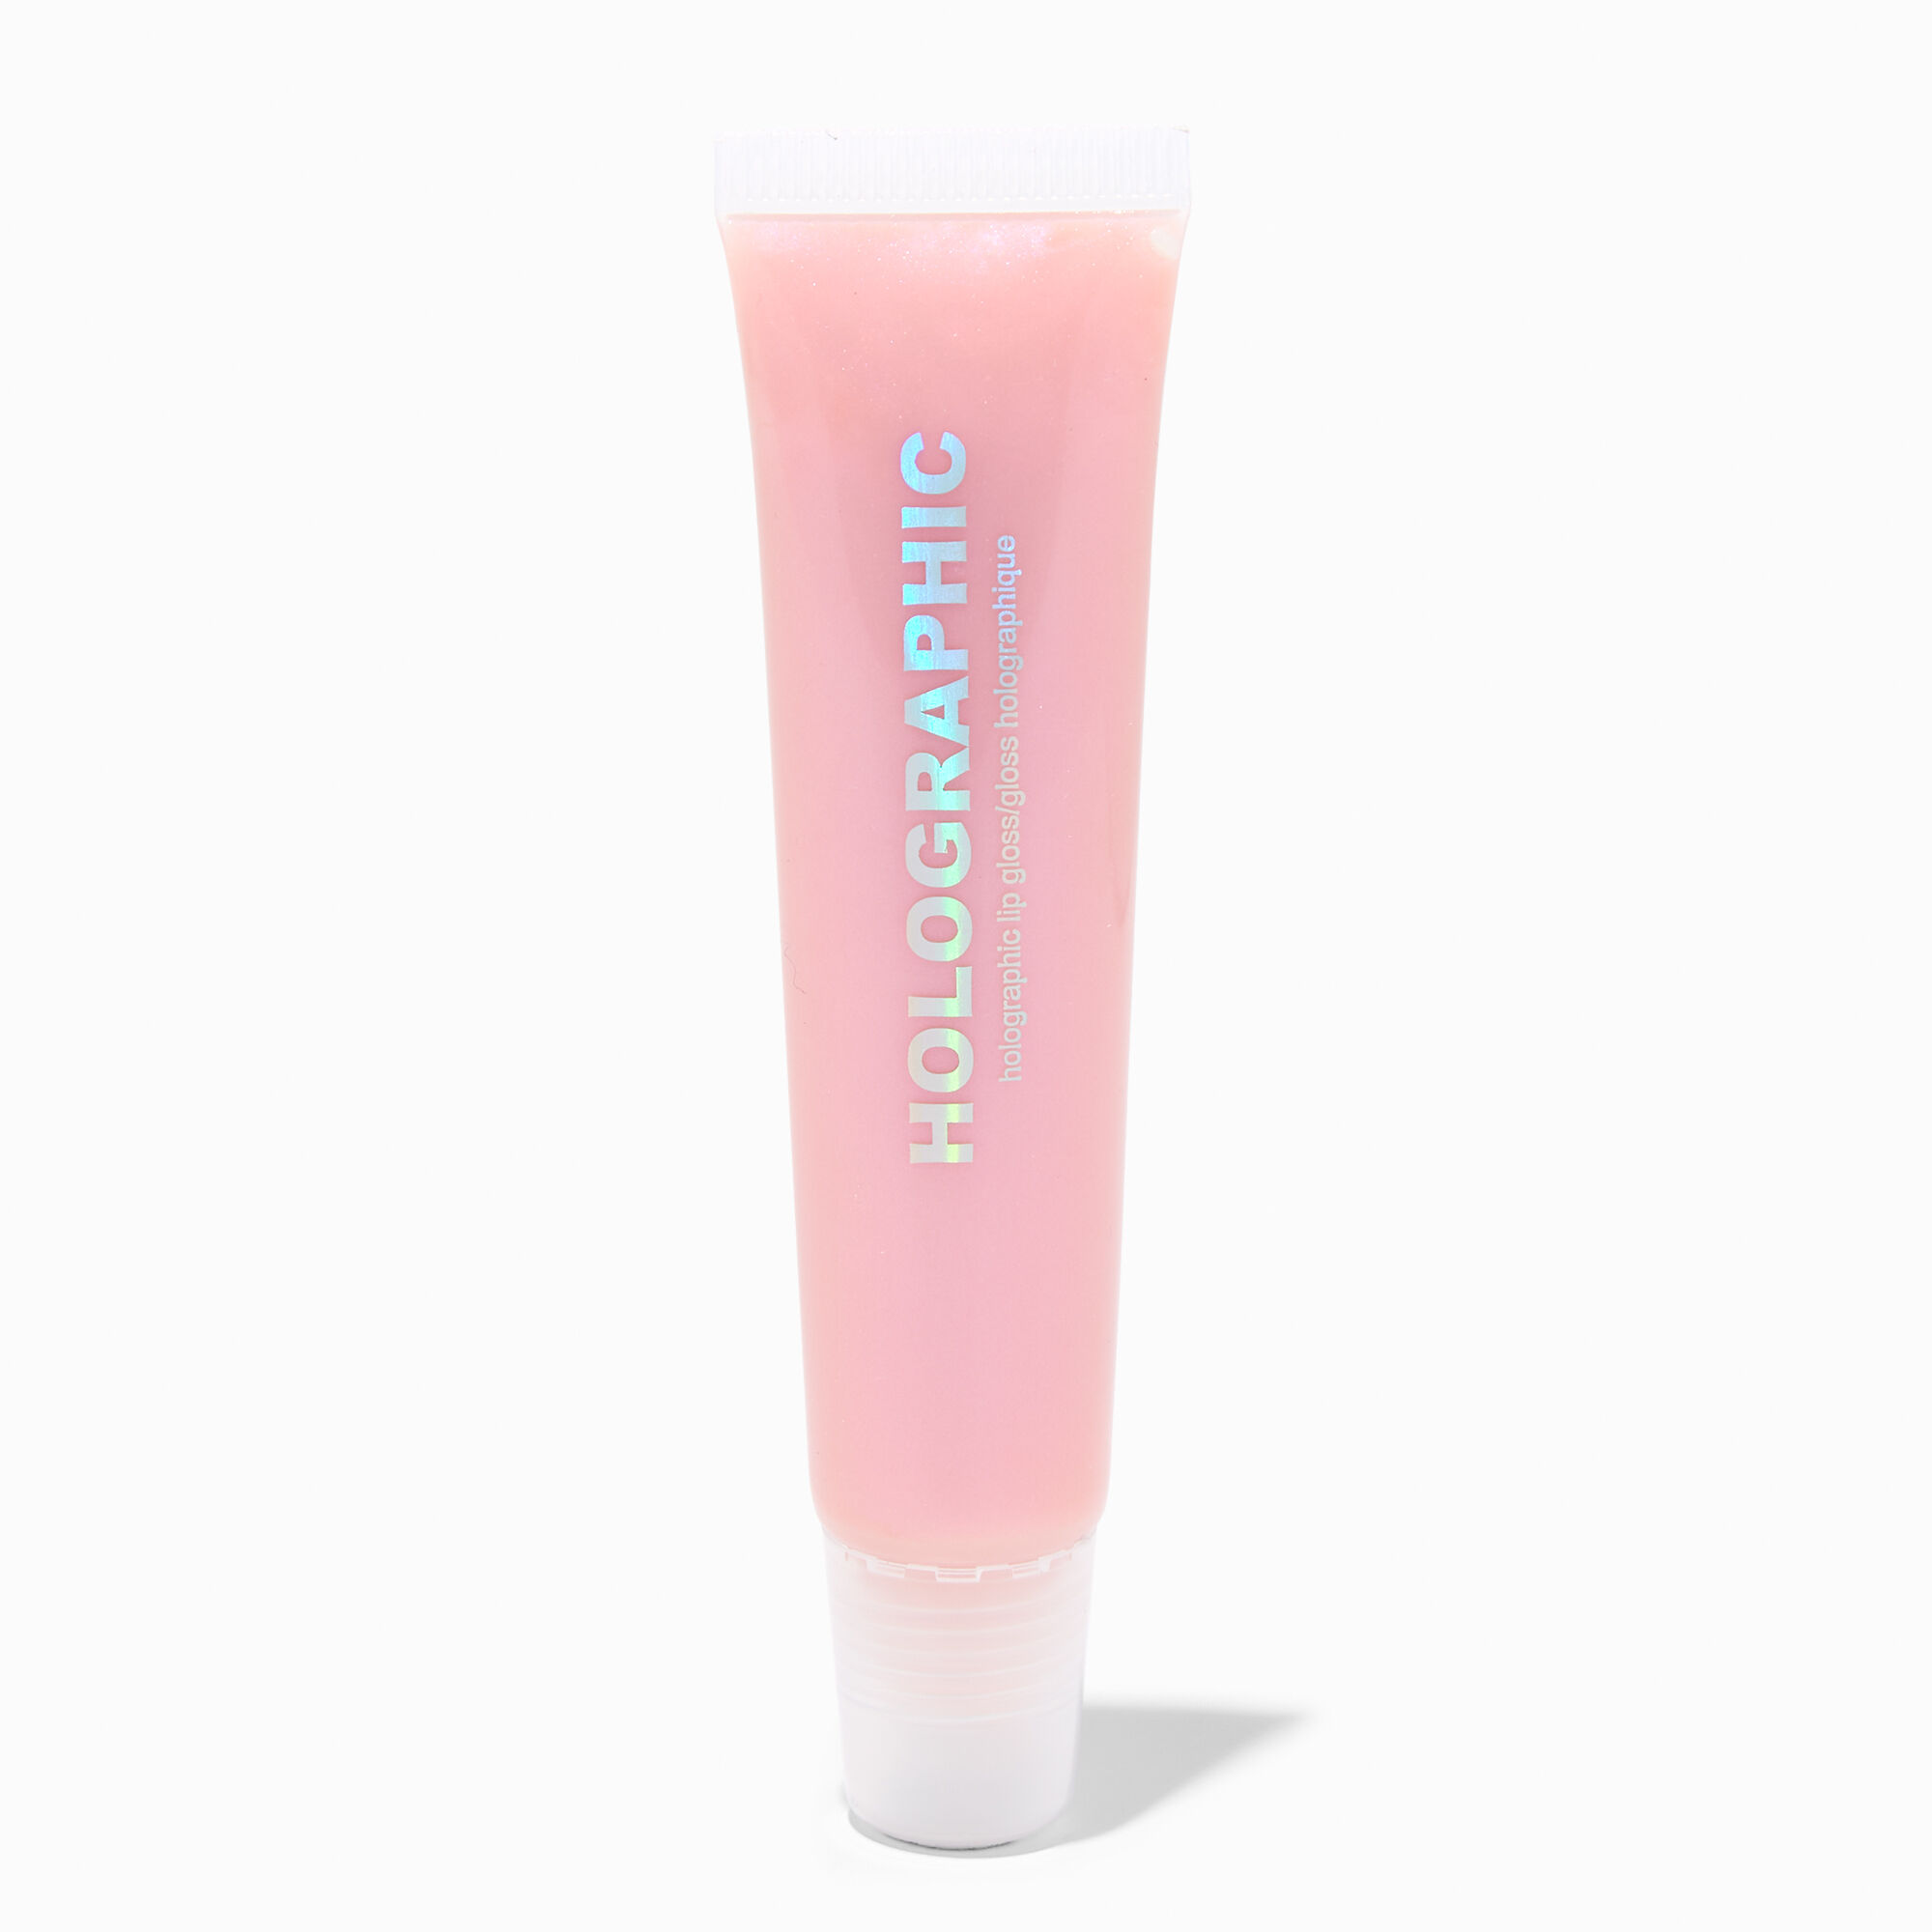 View Claires Holographic Light Glossy Lip Gloss Tube Pink information